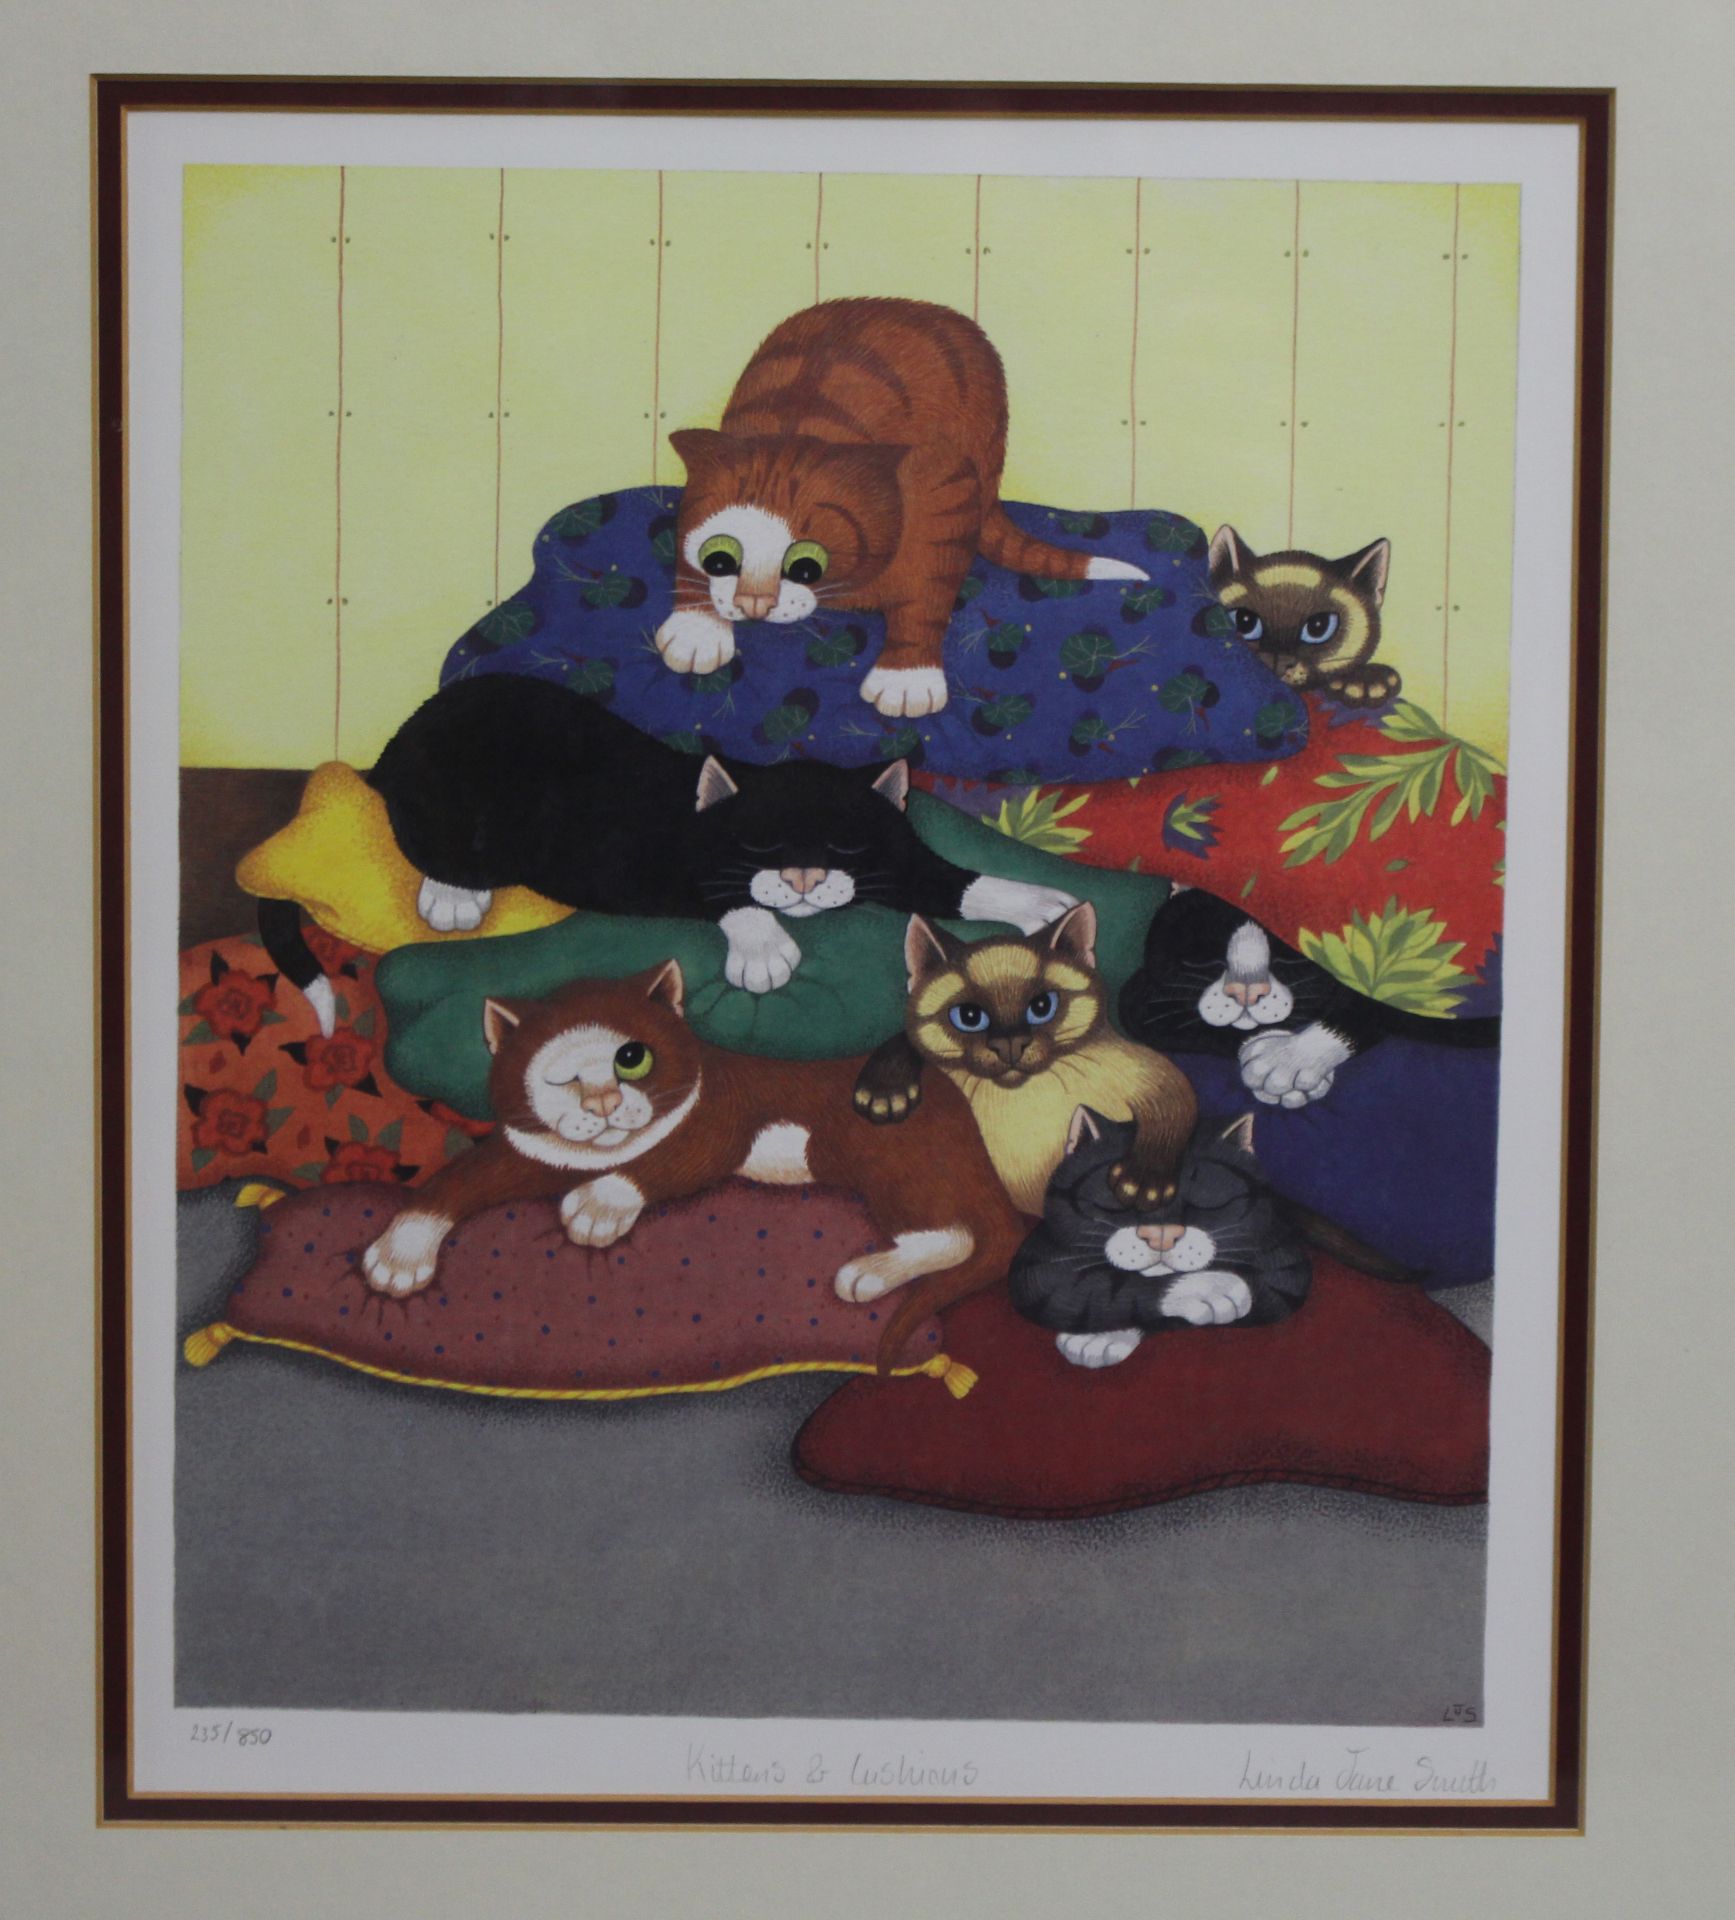 Kittens & Cushions"" Linda Jane Smith Limited Edition Print - Image 2 of 3